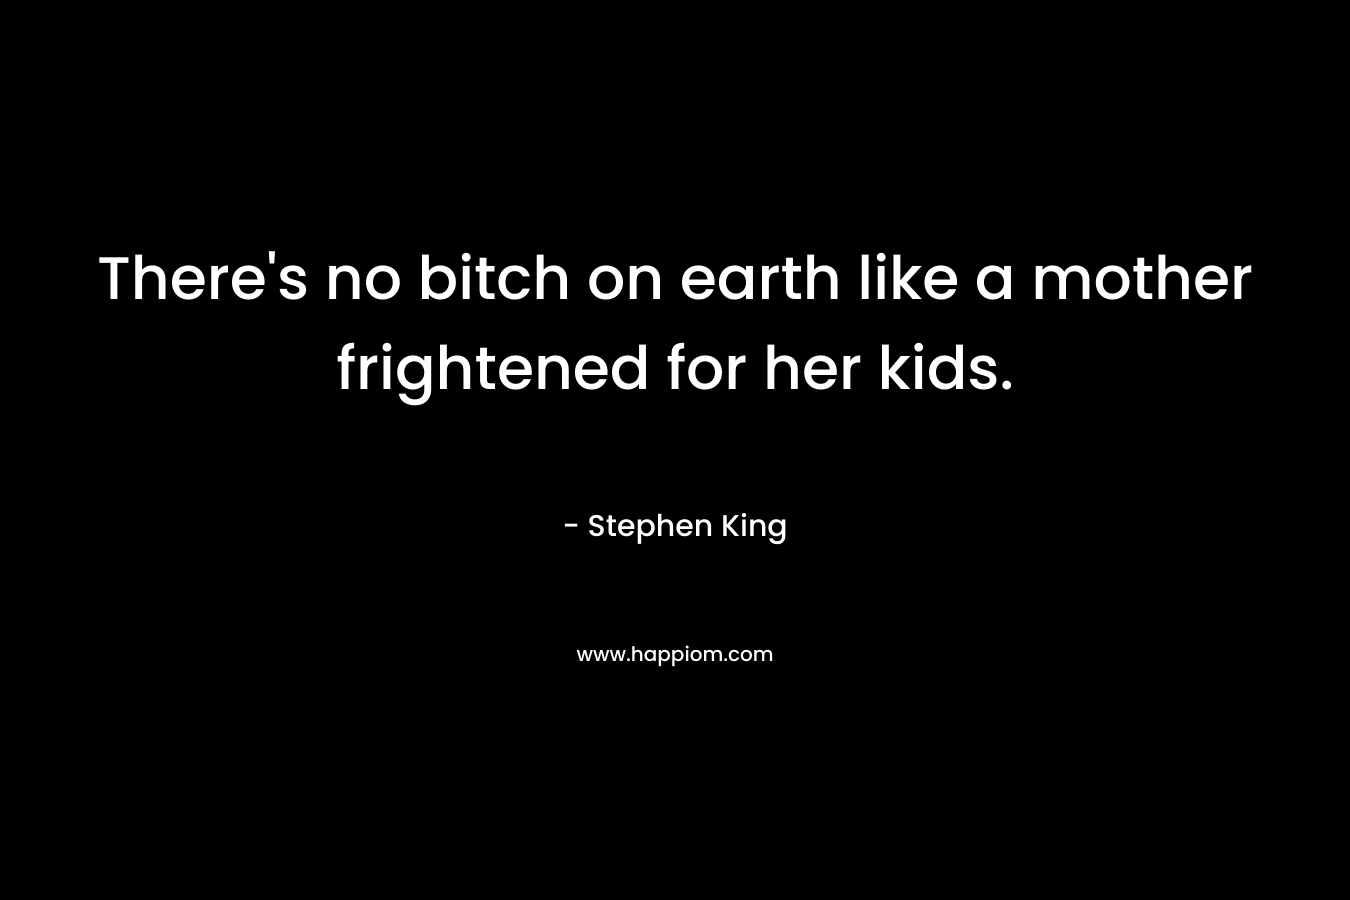 There's no bitch on earth like a mother frightened for her kids.